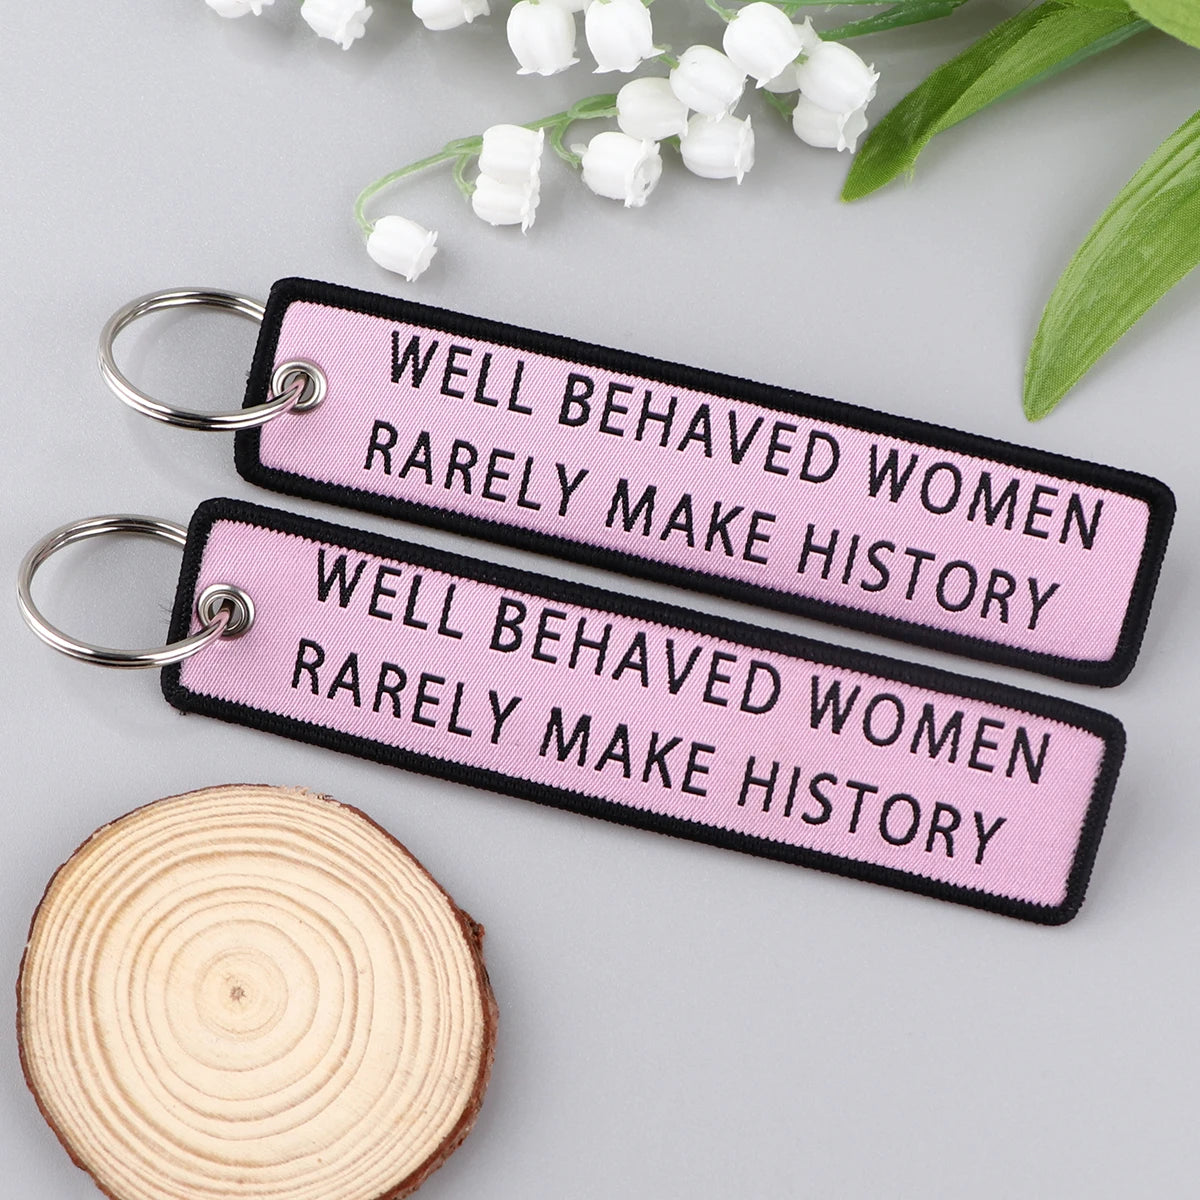 Keychain - Funny - Sarcastic - Embroidered Keychains